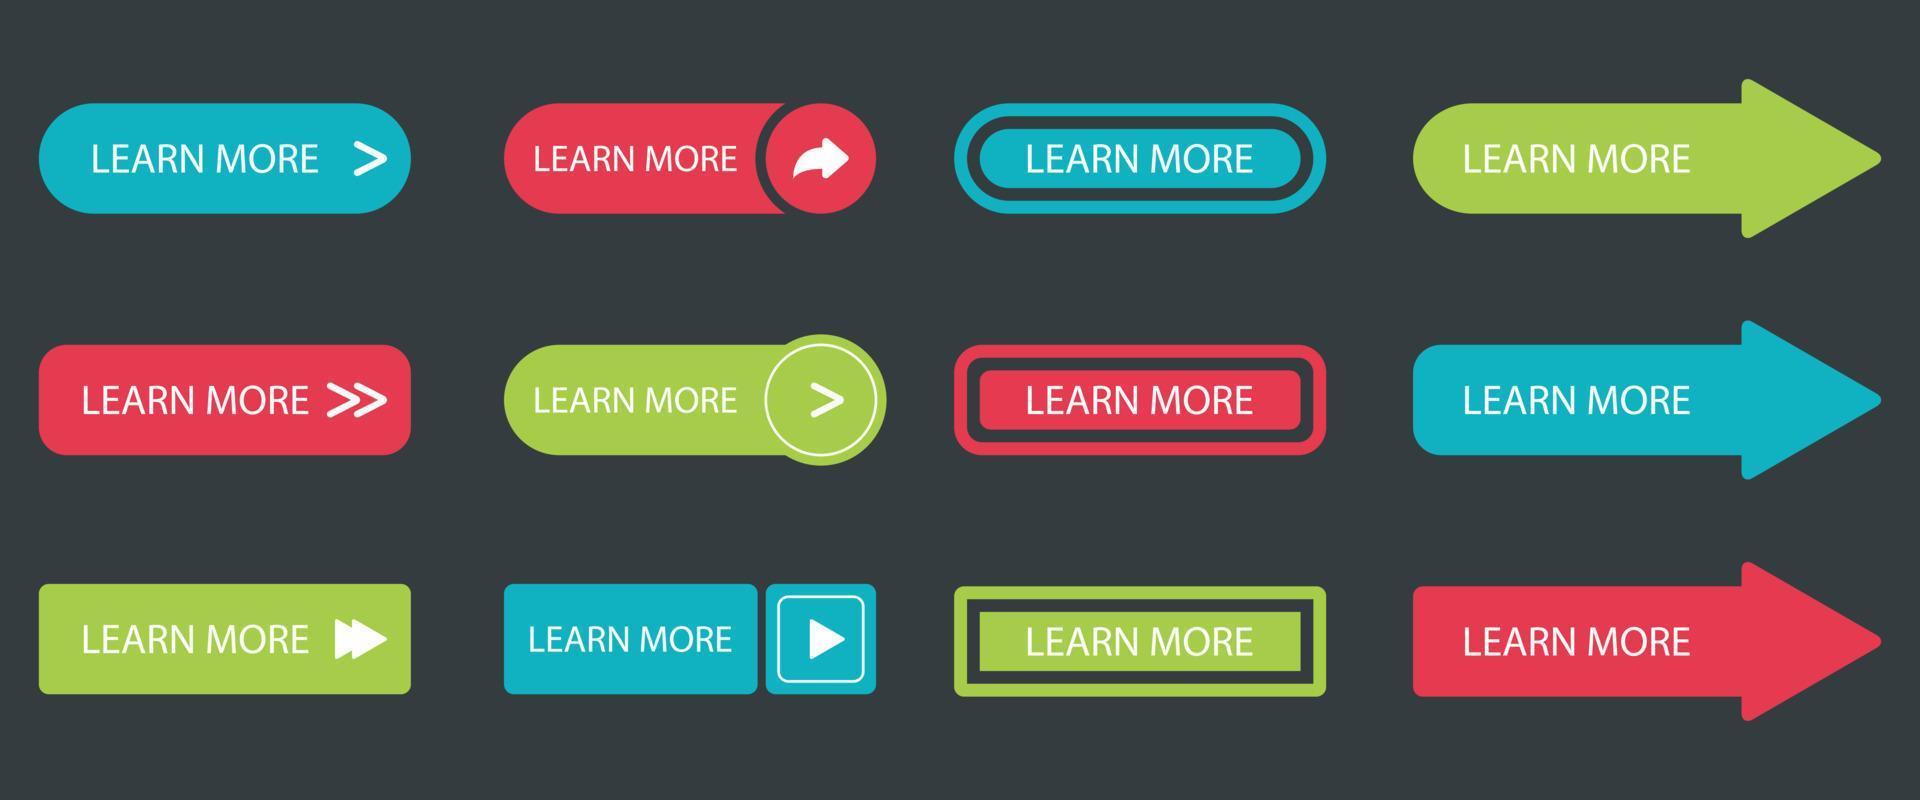 Learn more colorful buttons set for website design. Arrow button in different colors. Vector